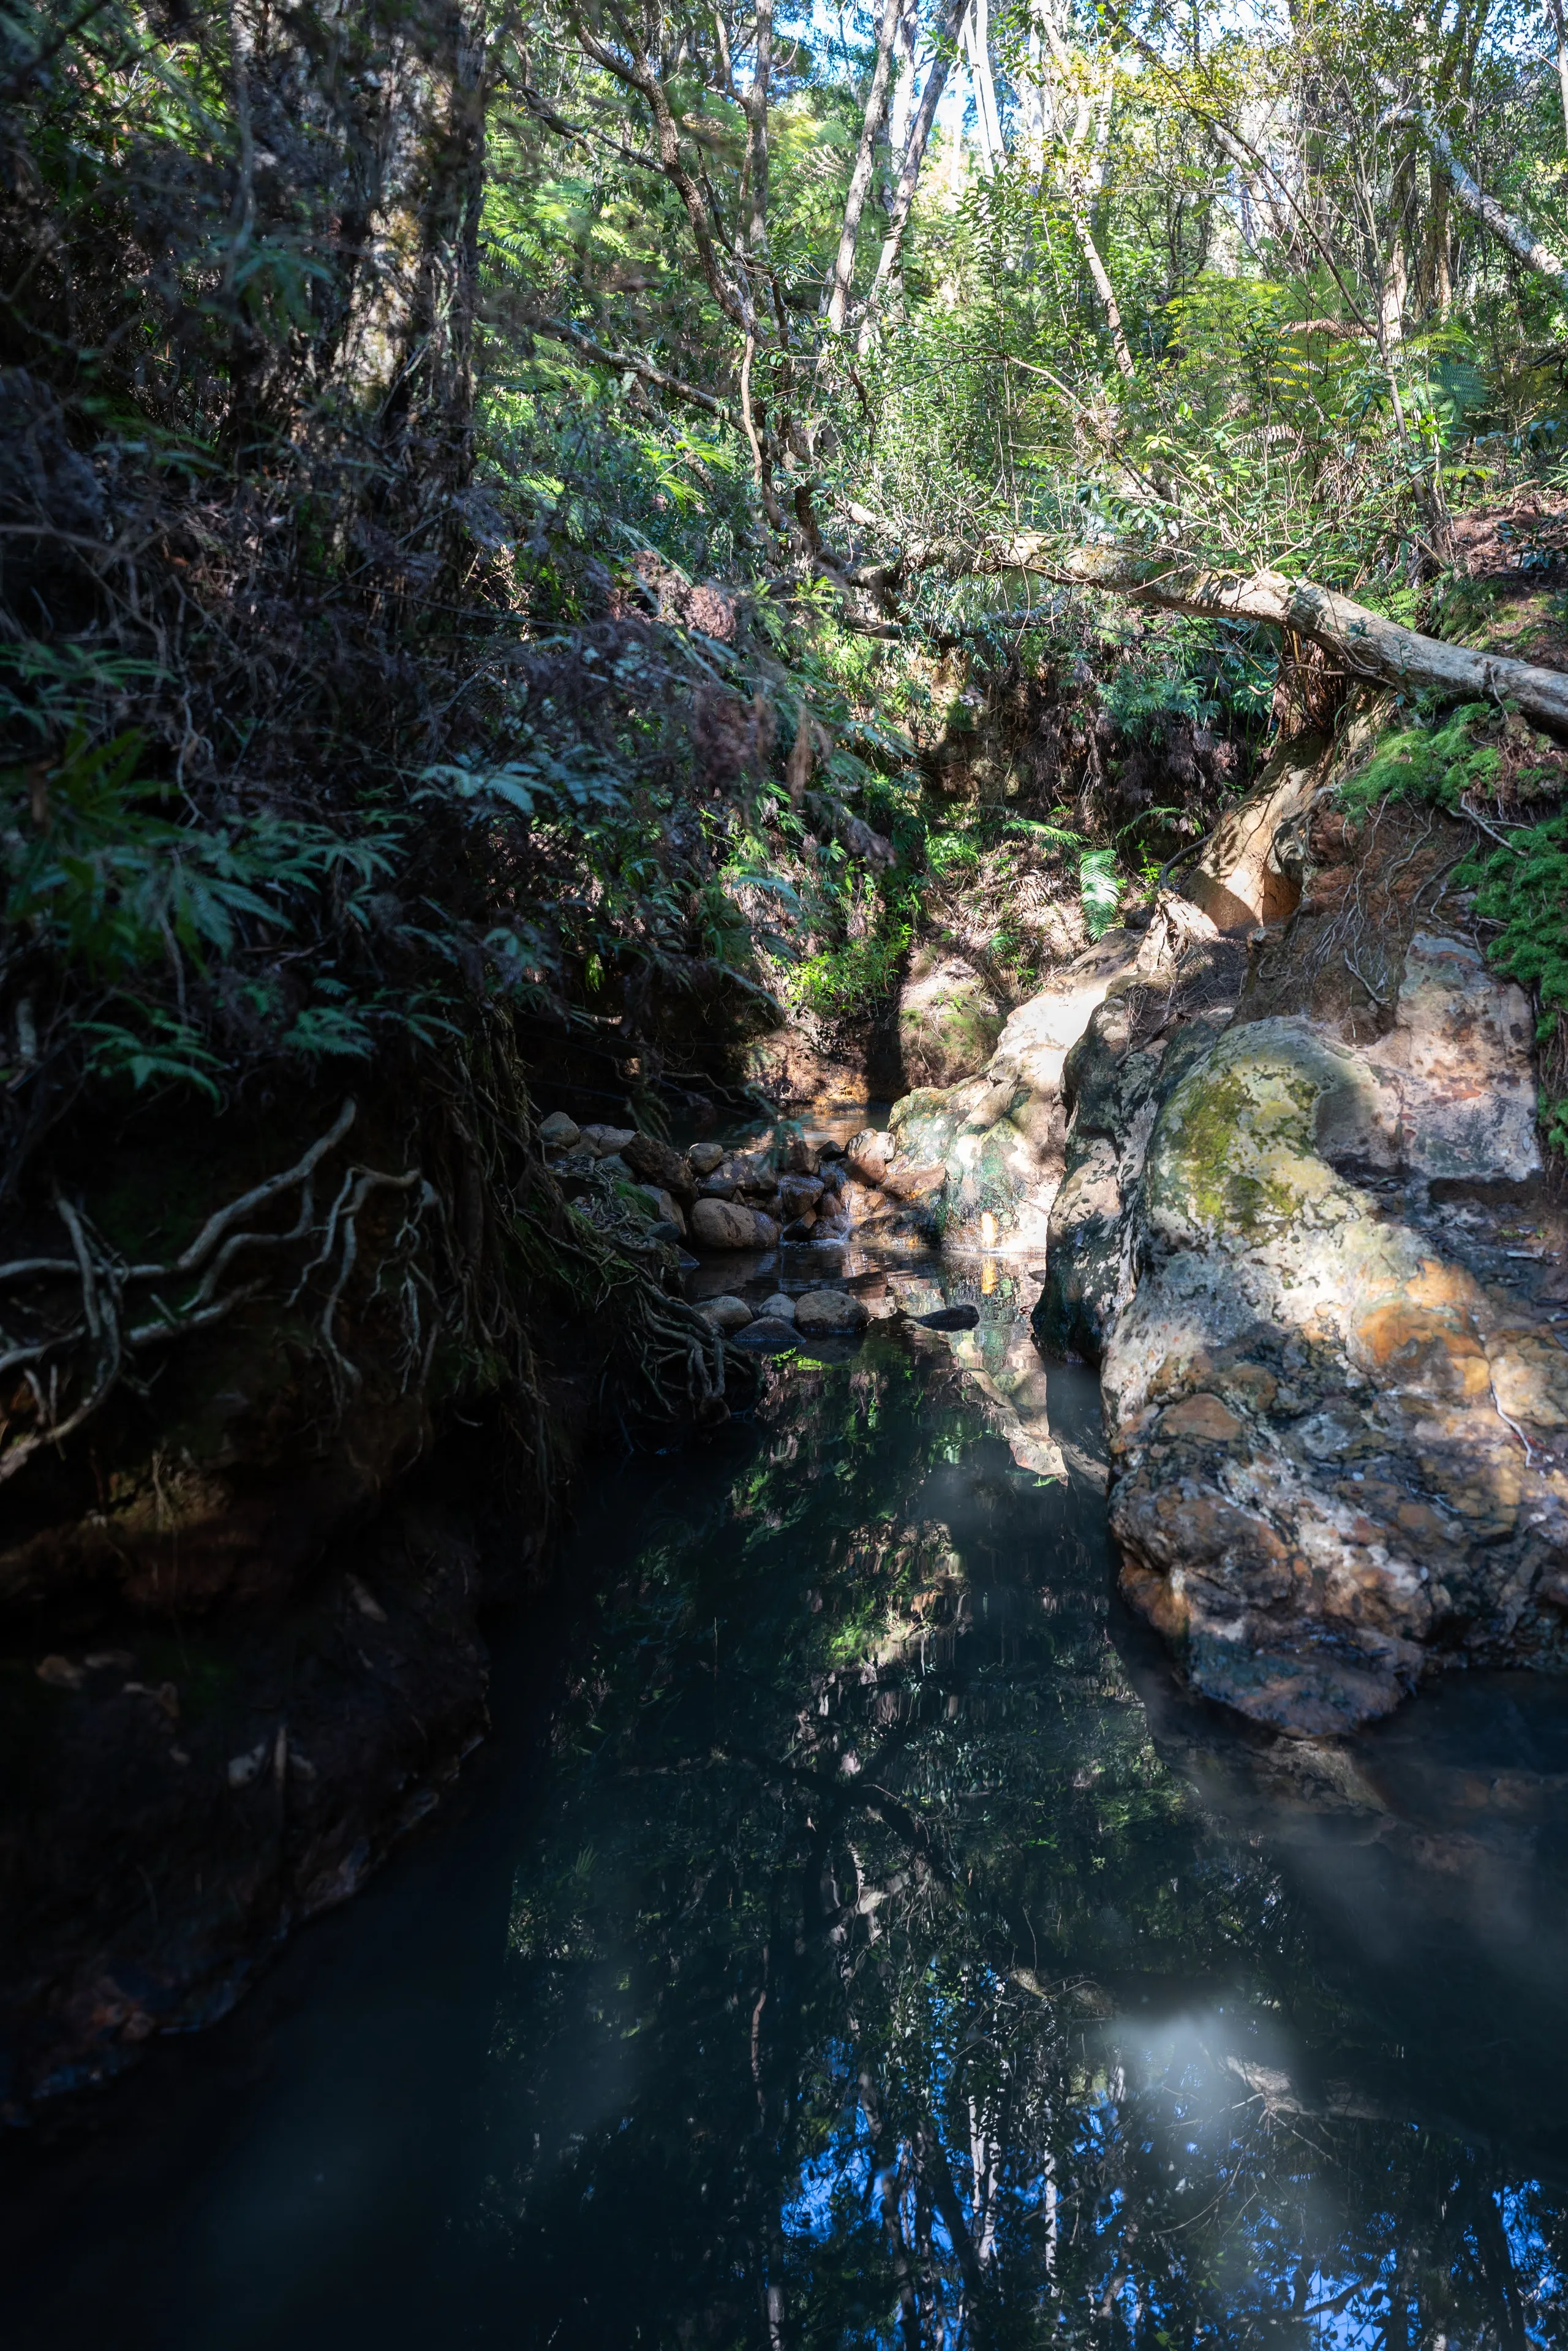 The upper stream at the Kaitoke hot springs. Our deep pool was the far one. Quite magical!